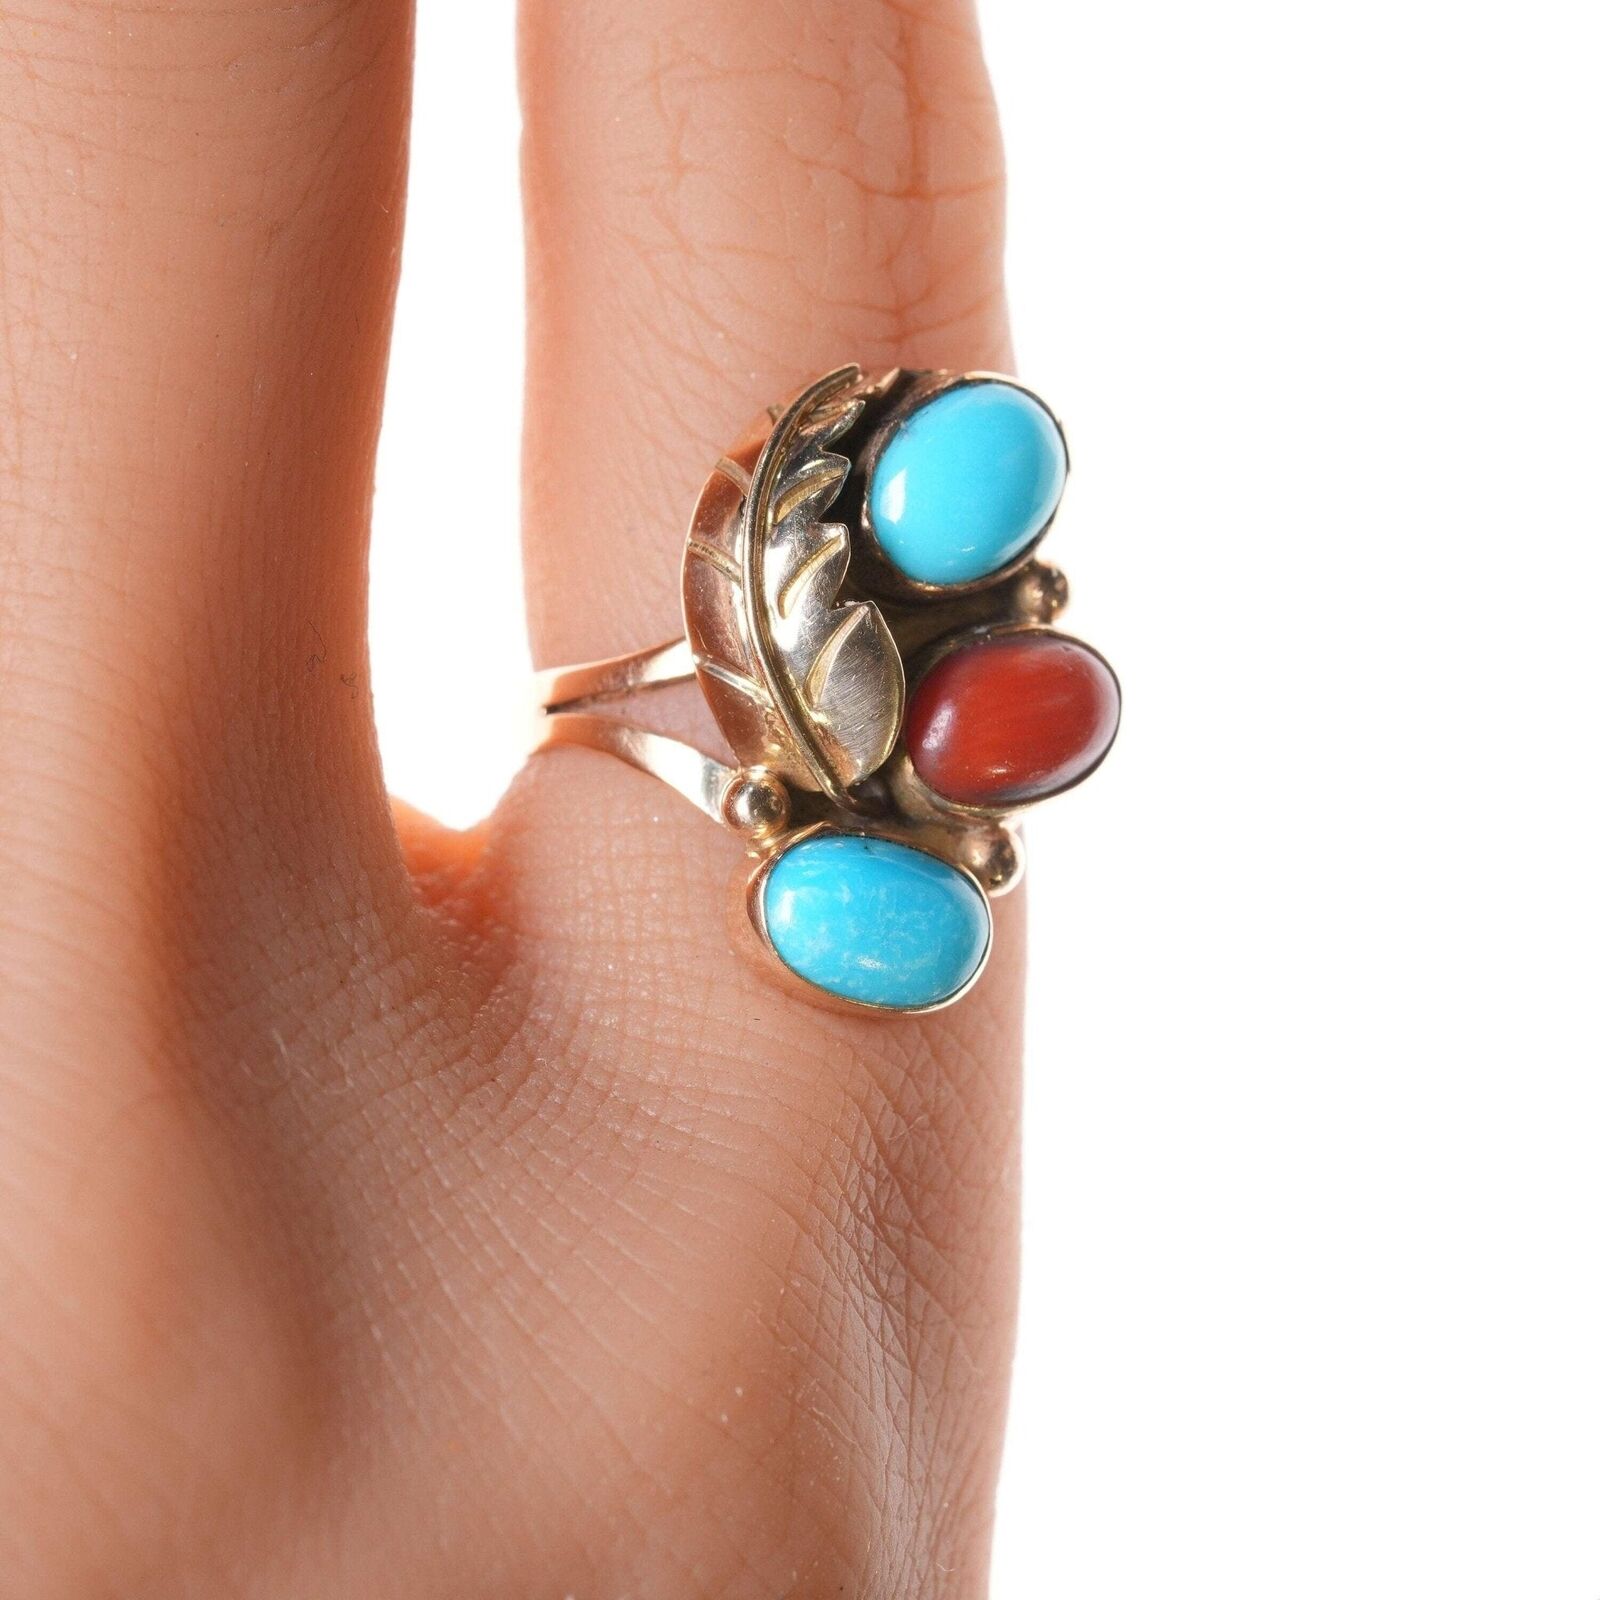 sz3 14k Marilyn Chuyate zuni ring turquoise and coral in gold